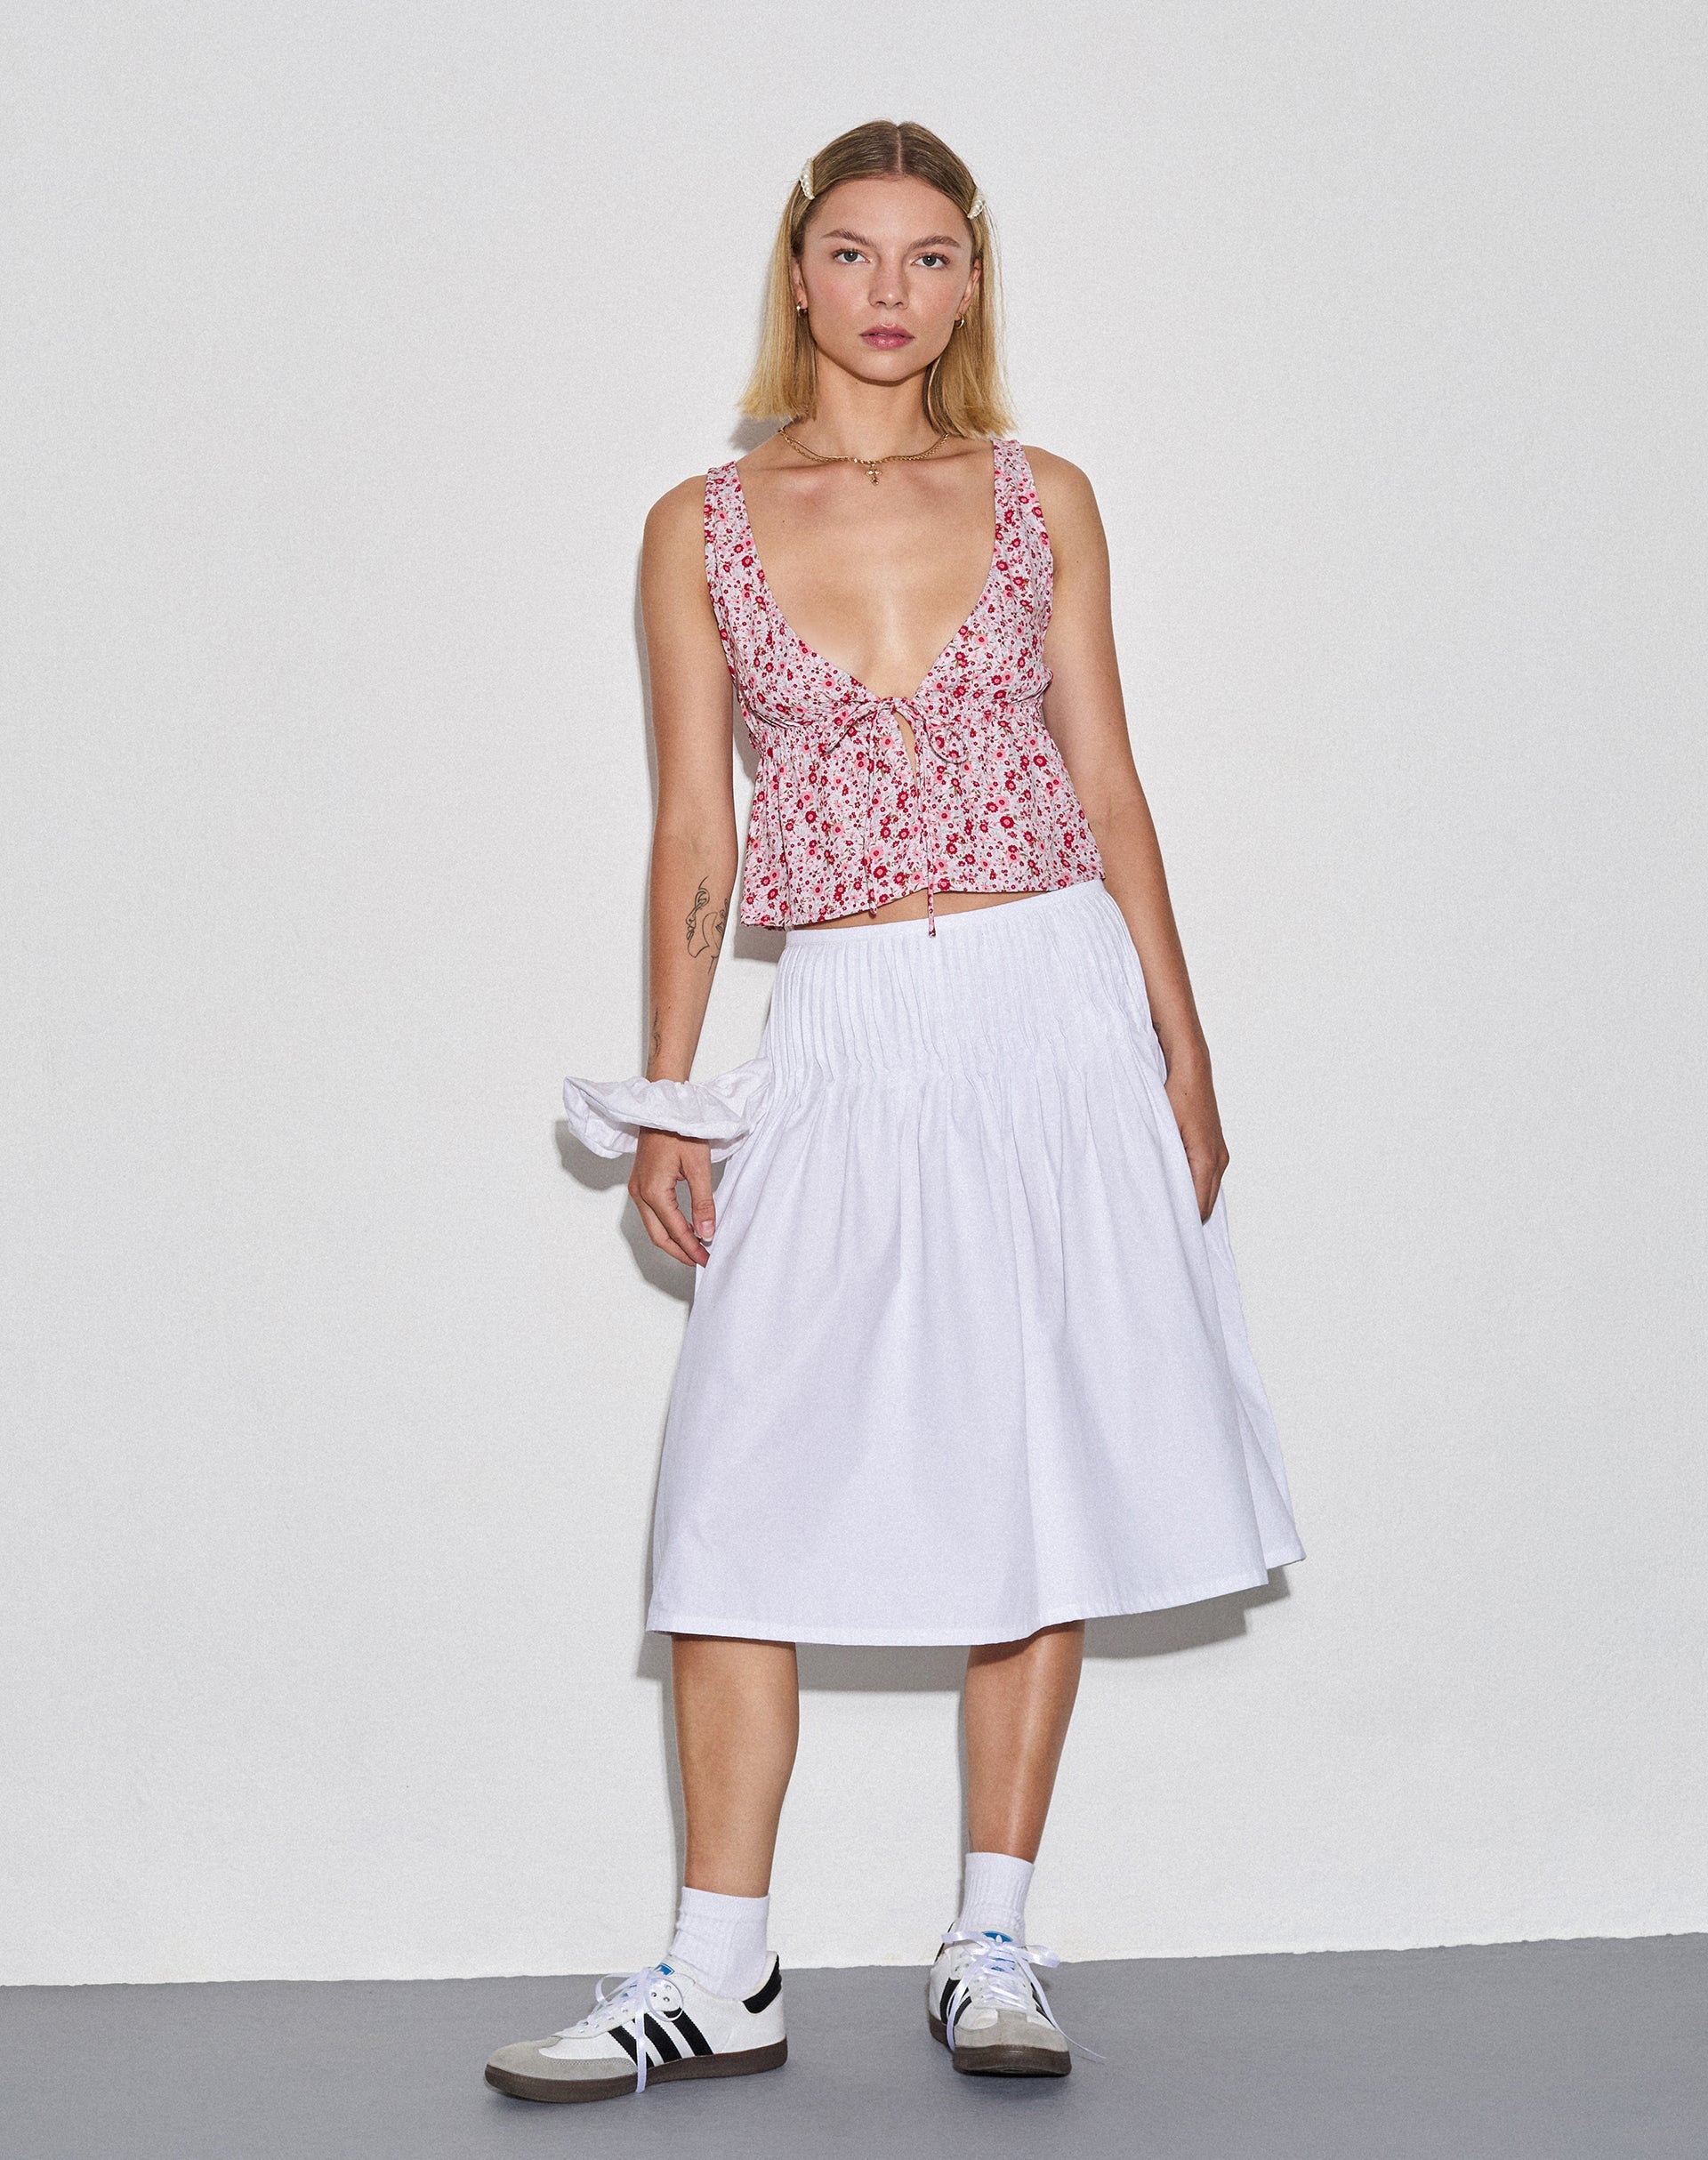 Image of Rolia Tie Front Top in Ditsy Floral Blush Red